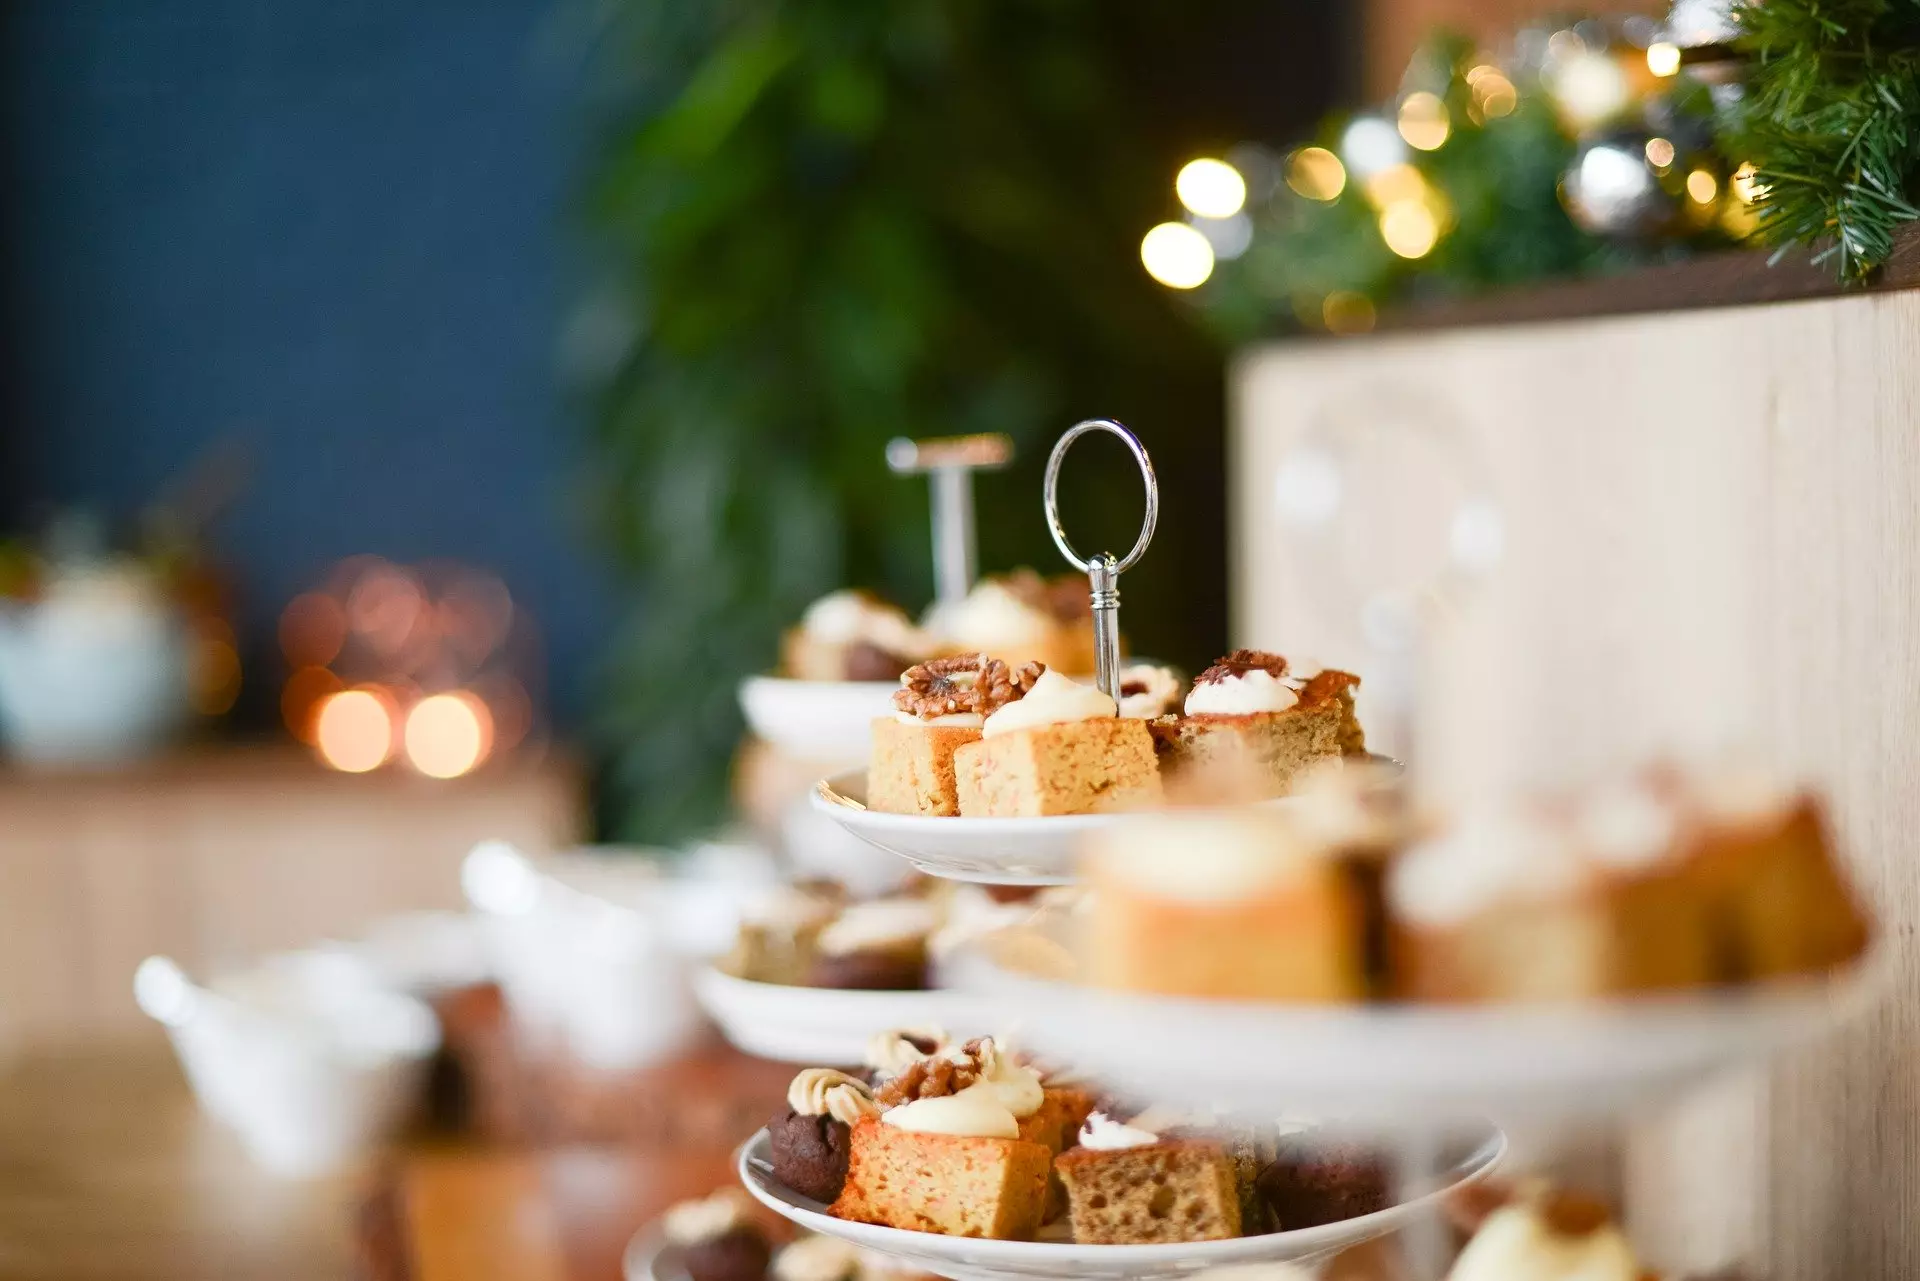 The brunch will actually serve up high tea style food (